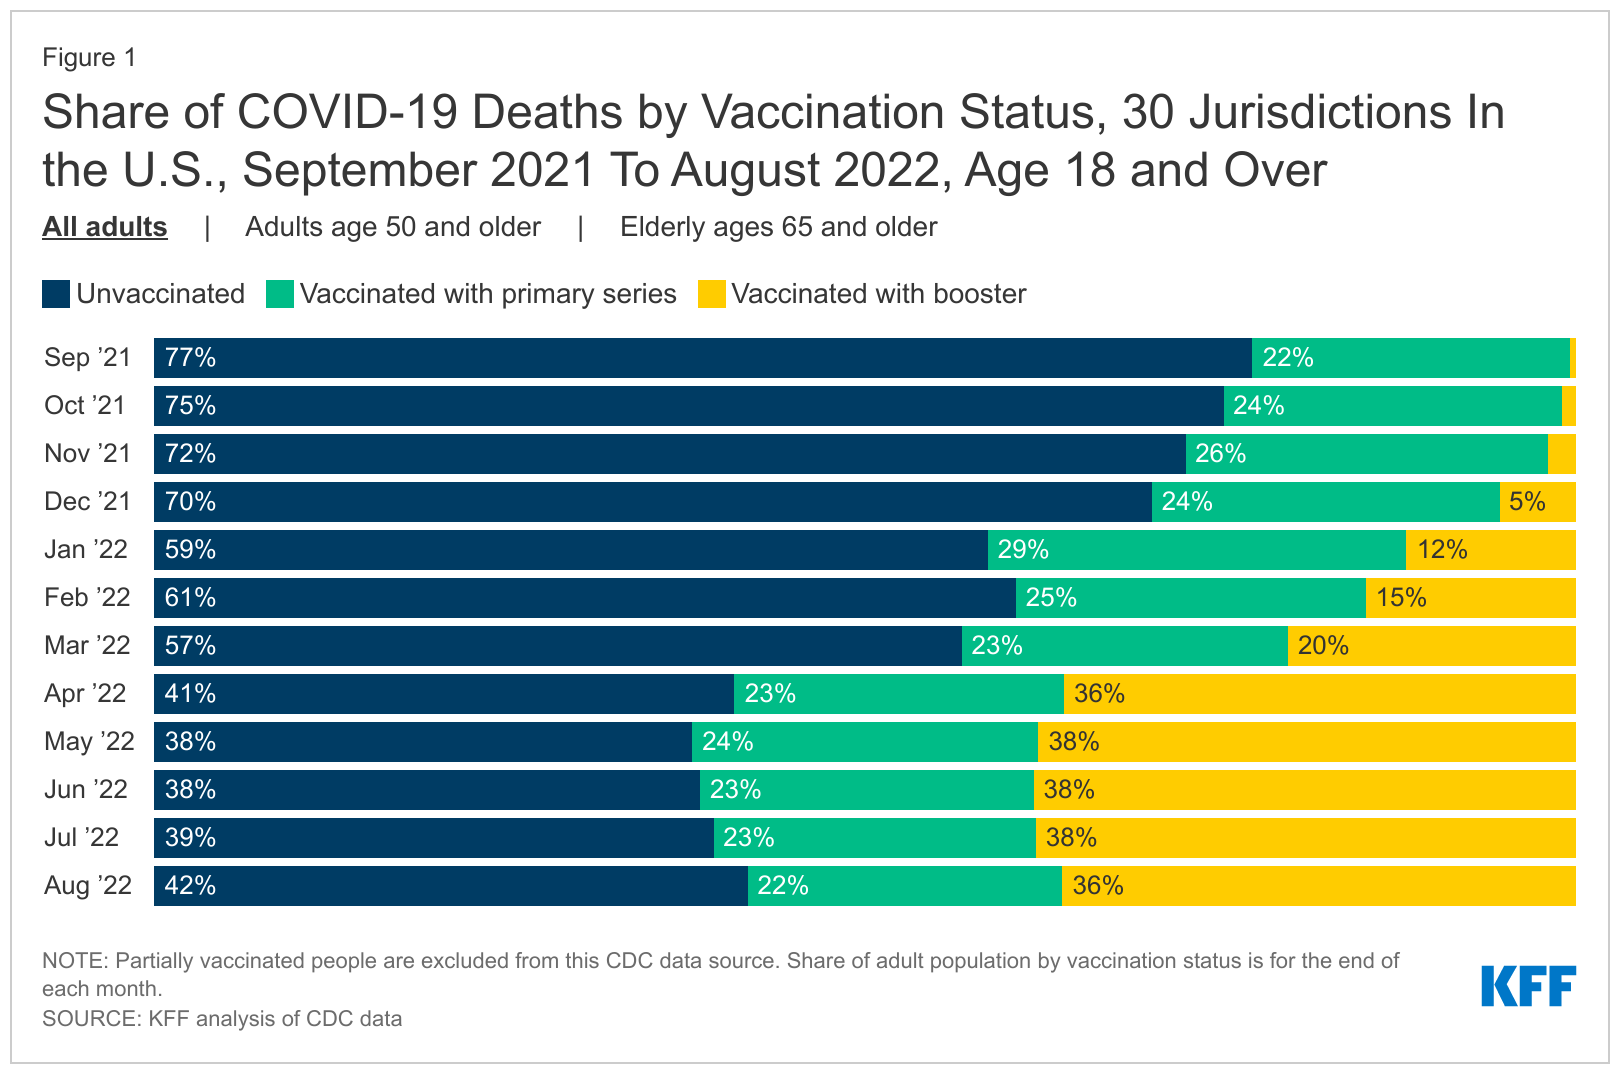 share-of-covid-19-deaths-by-vaccination-status-30-jurisdictions-in-the-u.s.-september-2021-to-august-2022-age-18-and-over.png